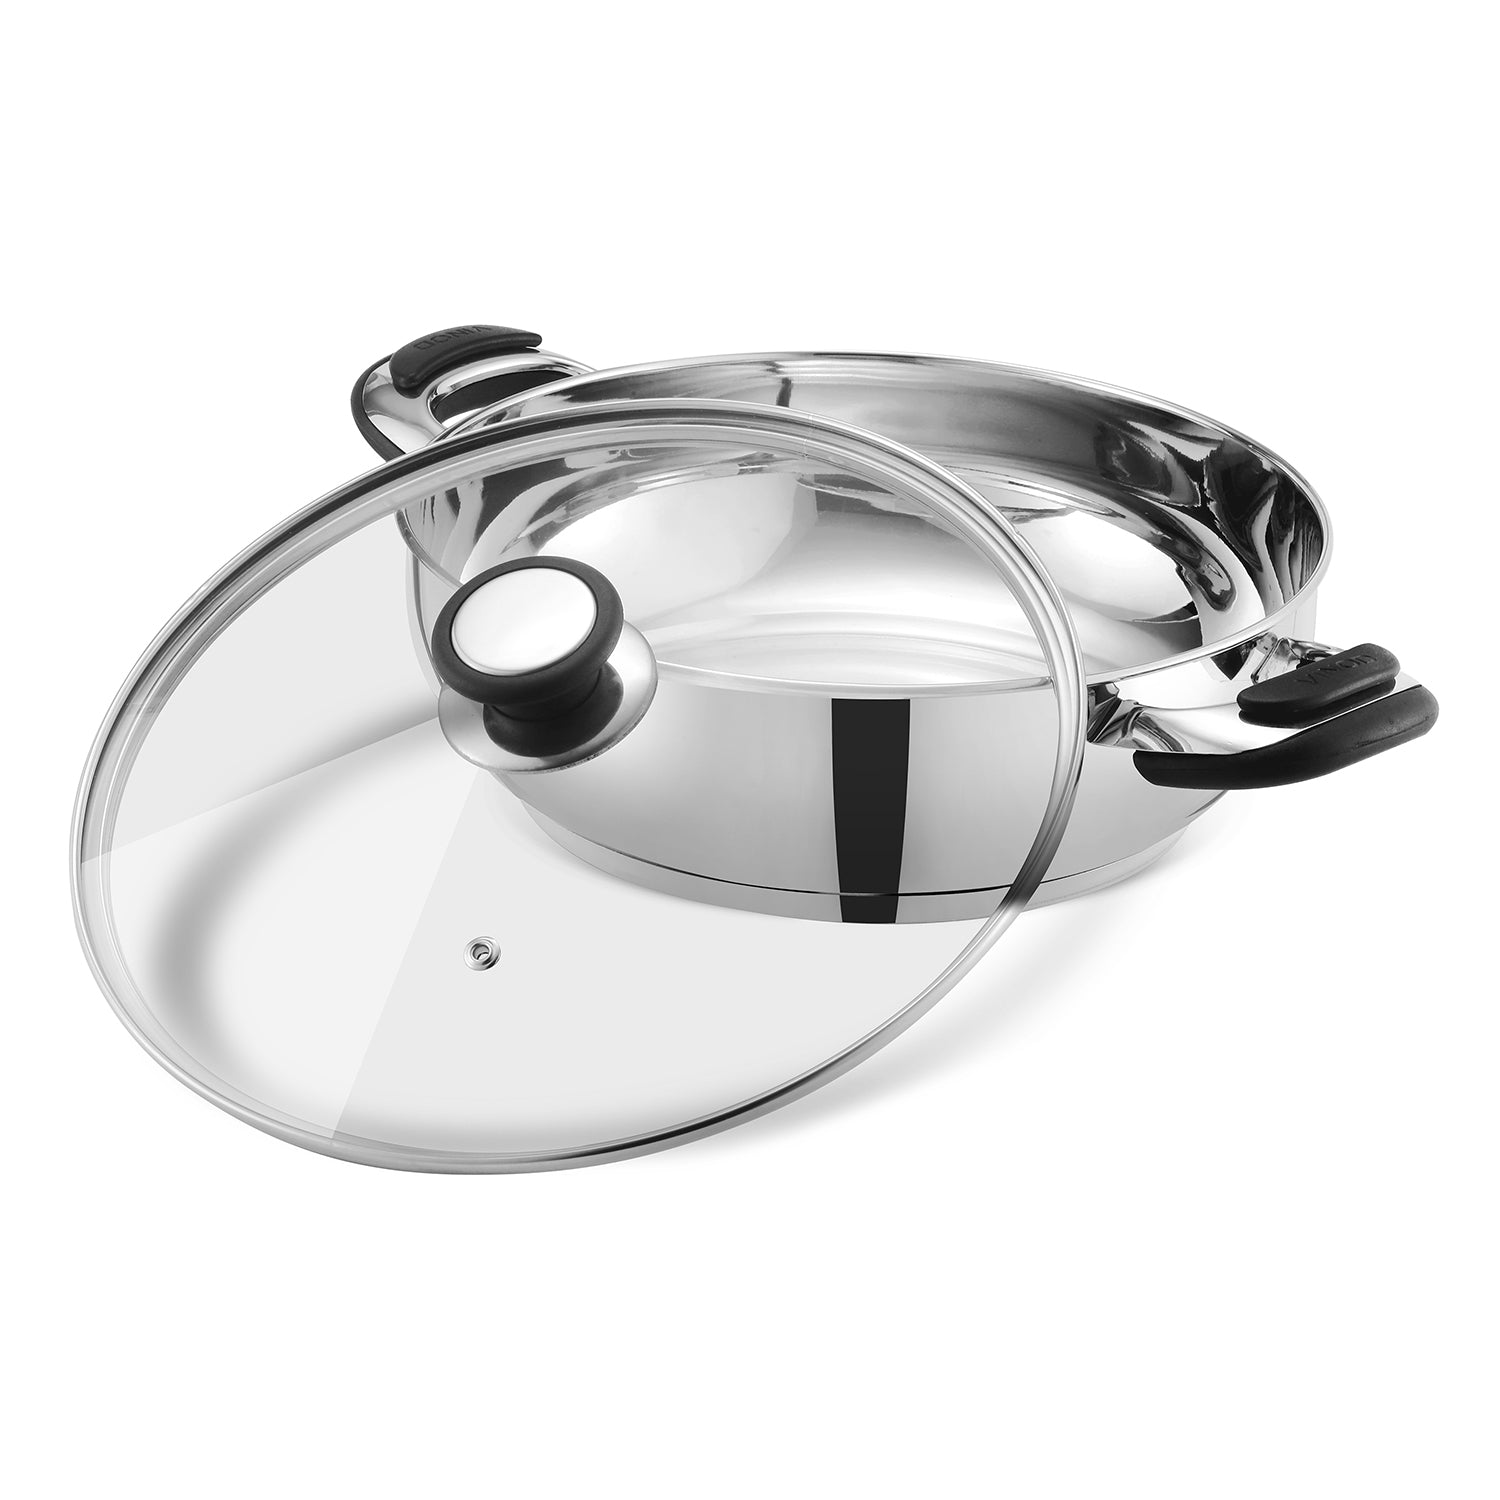 Durban Stainless Steel Kadai with Glass Lid